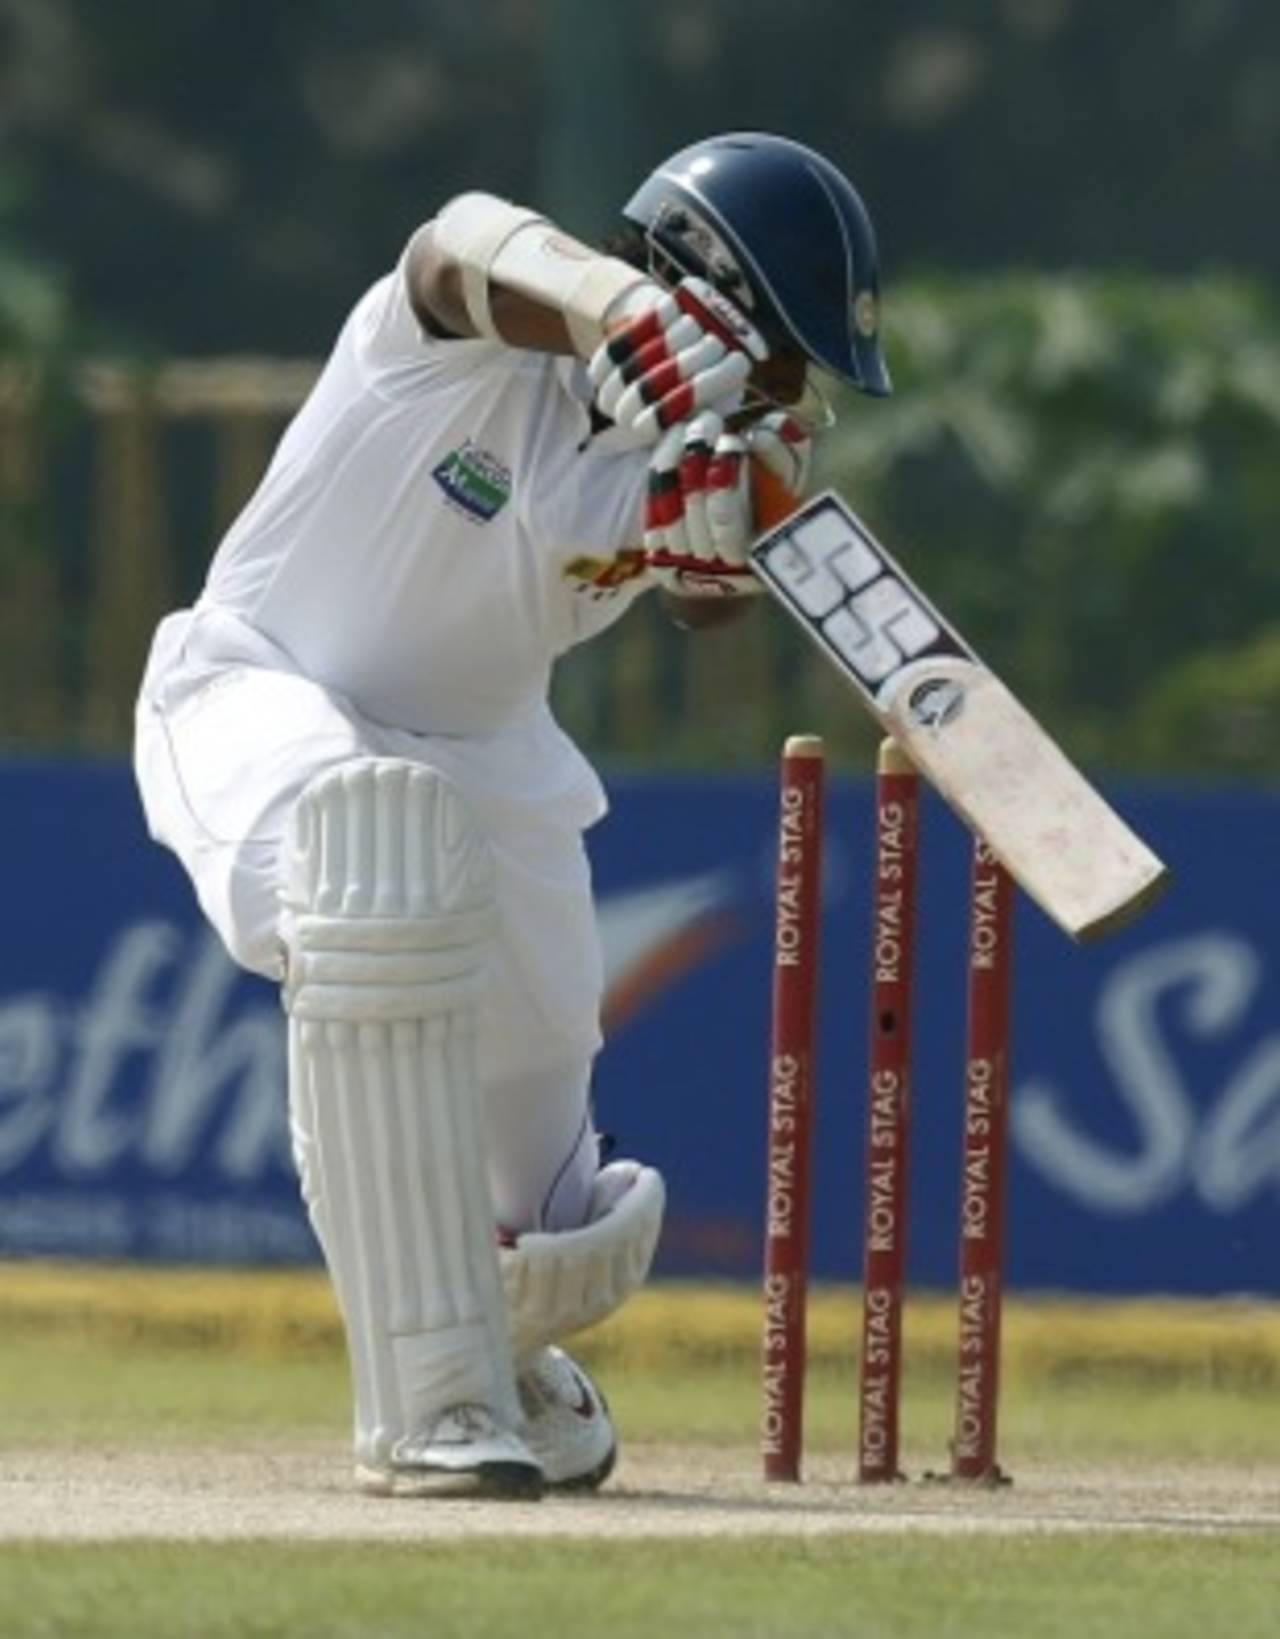 Tharanga Paranavitana was bowled in the first over, Sri Lanka v New Zealand, 1st Test, Galle, 2nd day, November 18, 2012